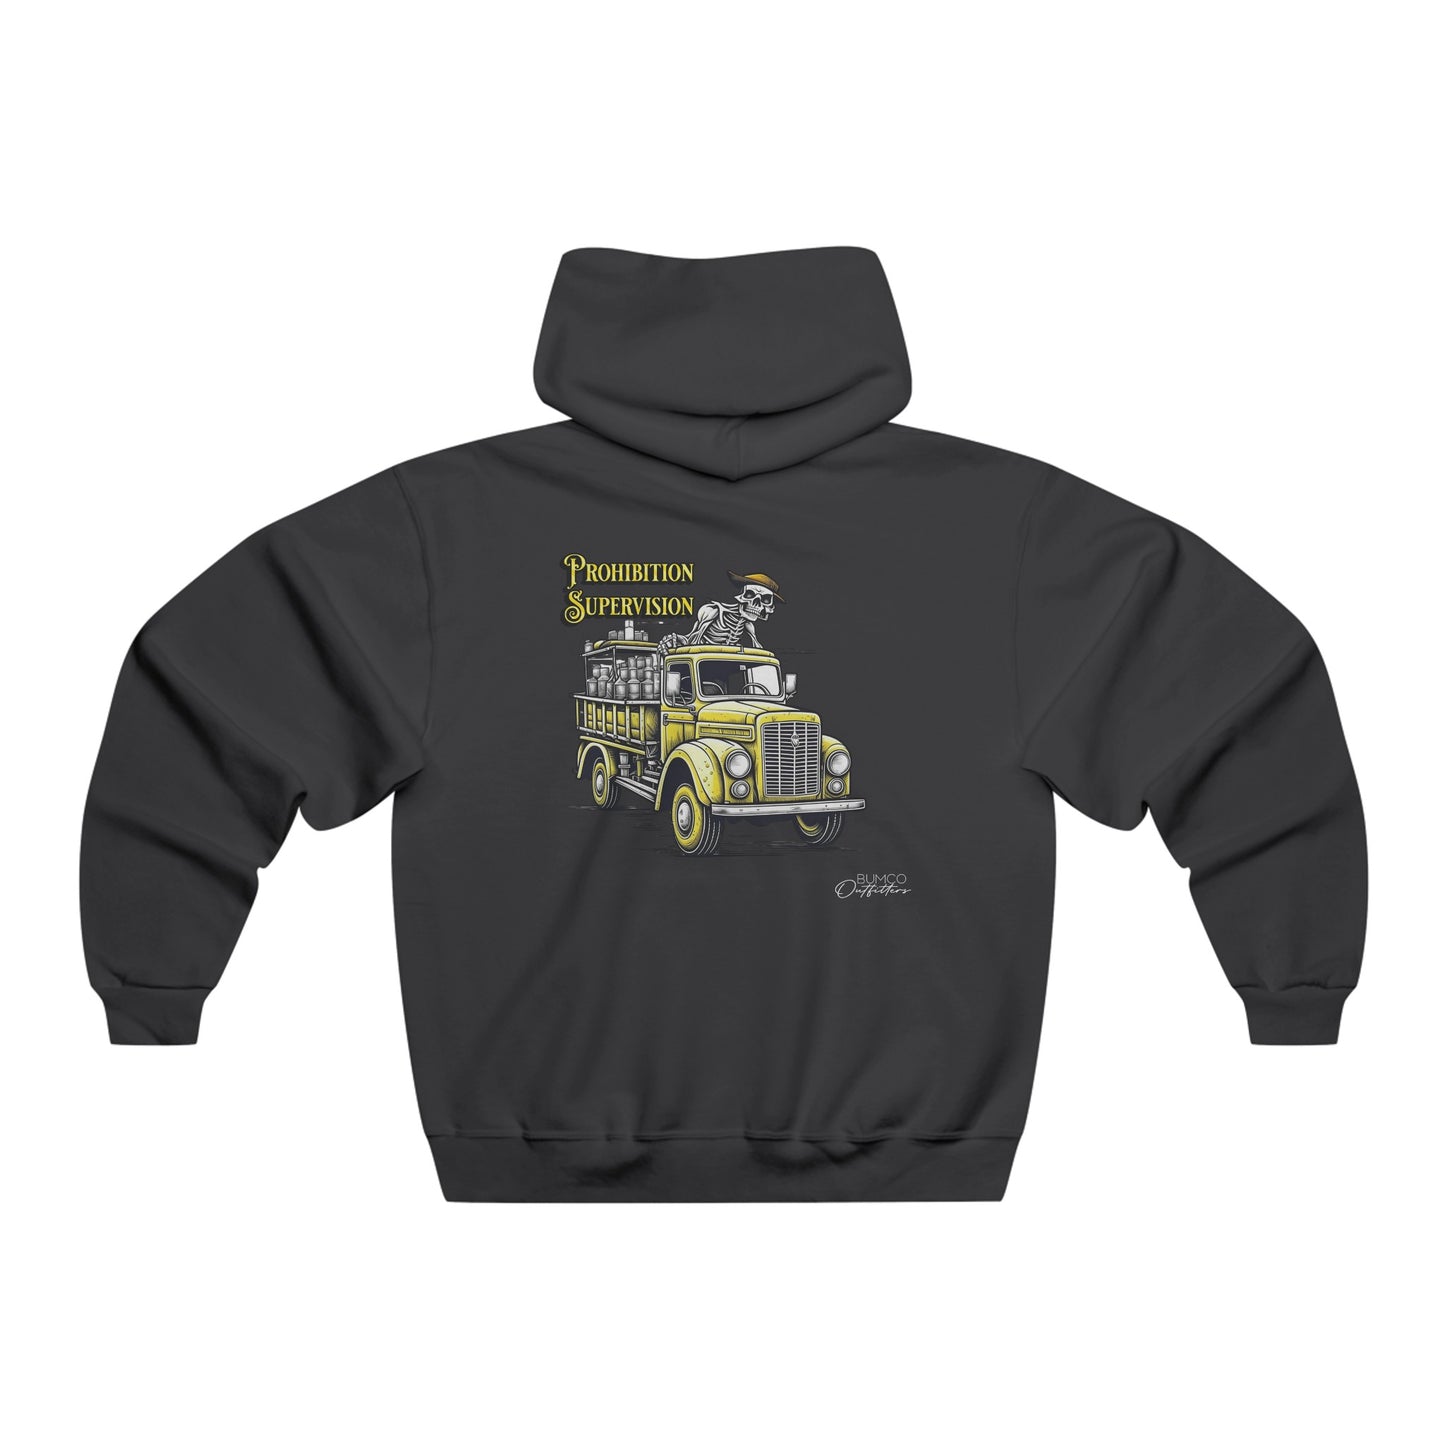 Prohibition Supervision - Hoodie